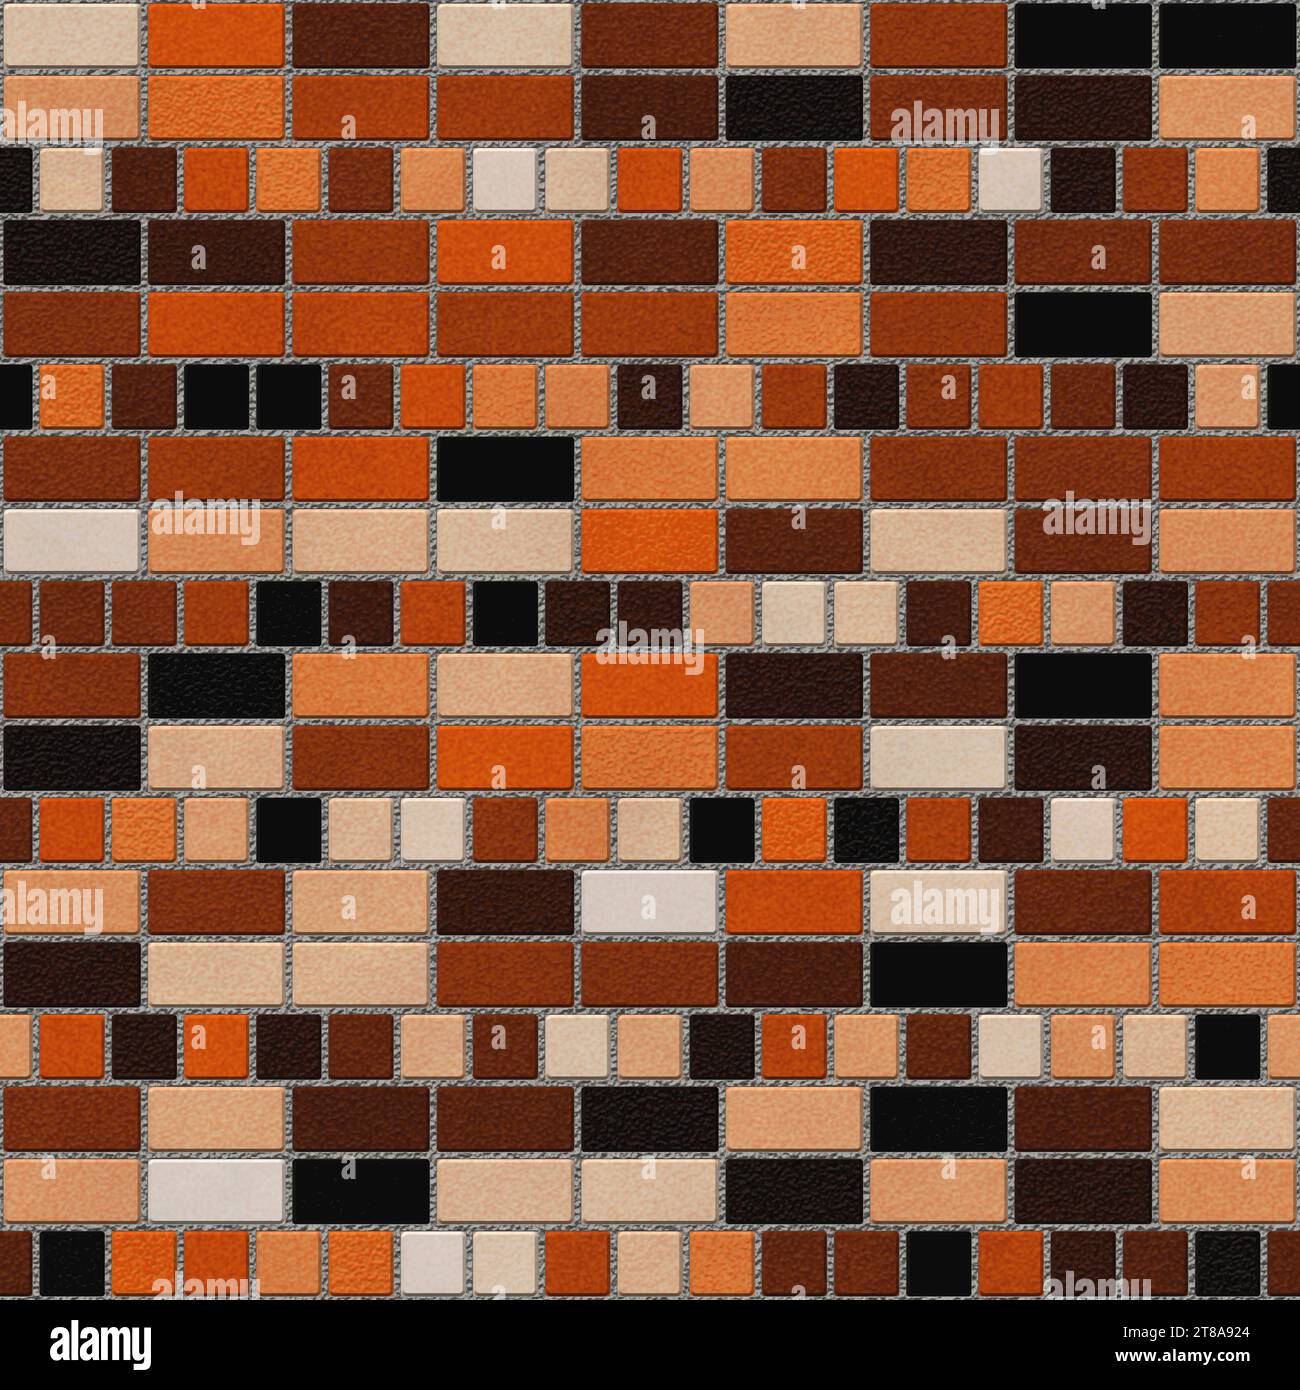 Brick drawing. Colorful brick wall seamless background- texture pattern for continuous replication. Brick pattern. Stock Photo